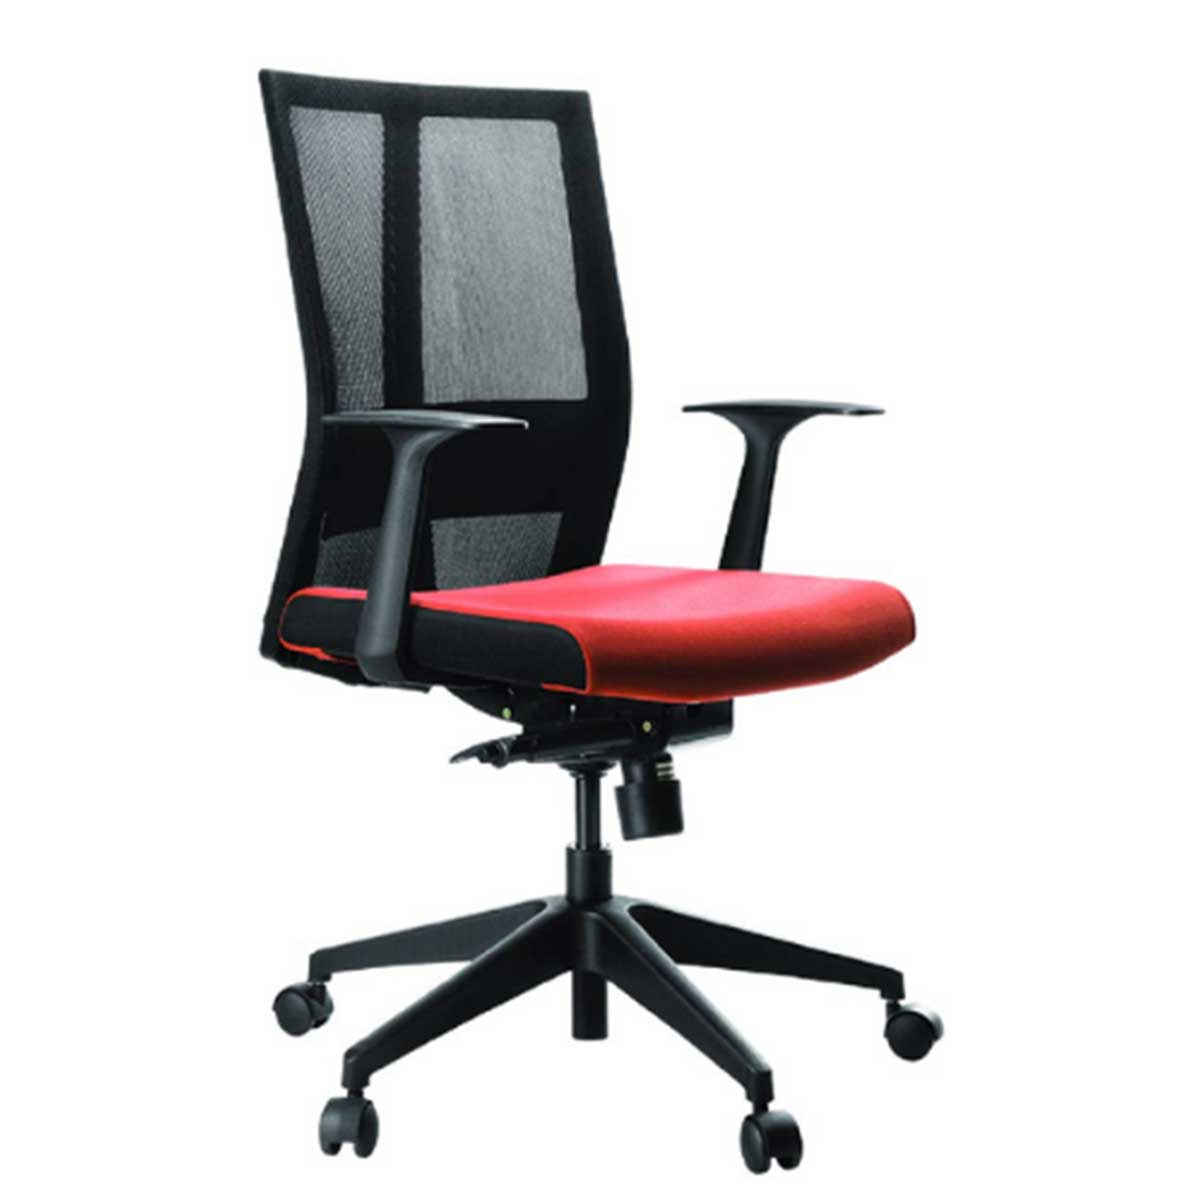 Conference Chair Manufacturers, Suppliers in Aerocity